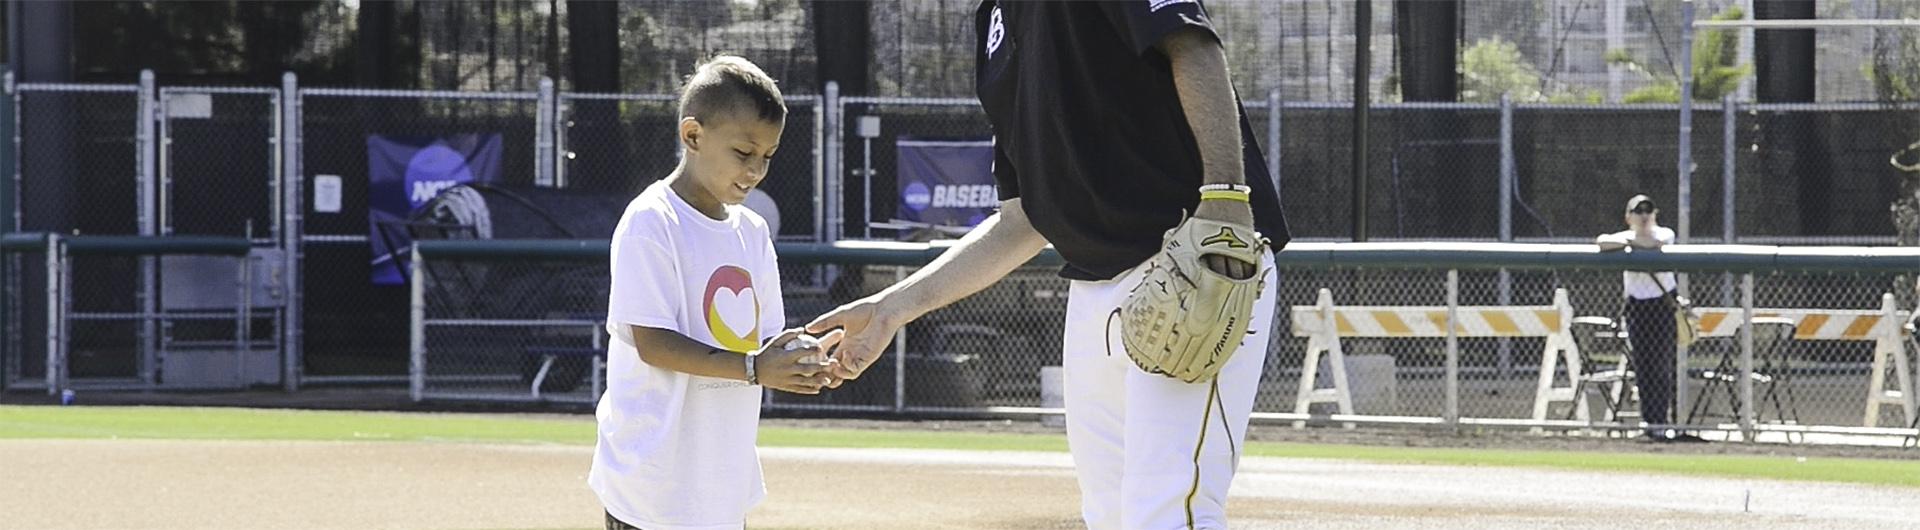 cancer kid with Dirtbags player